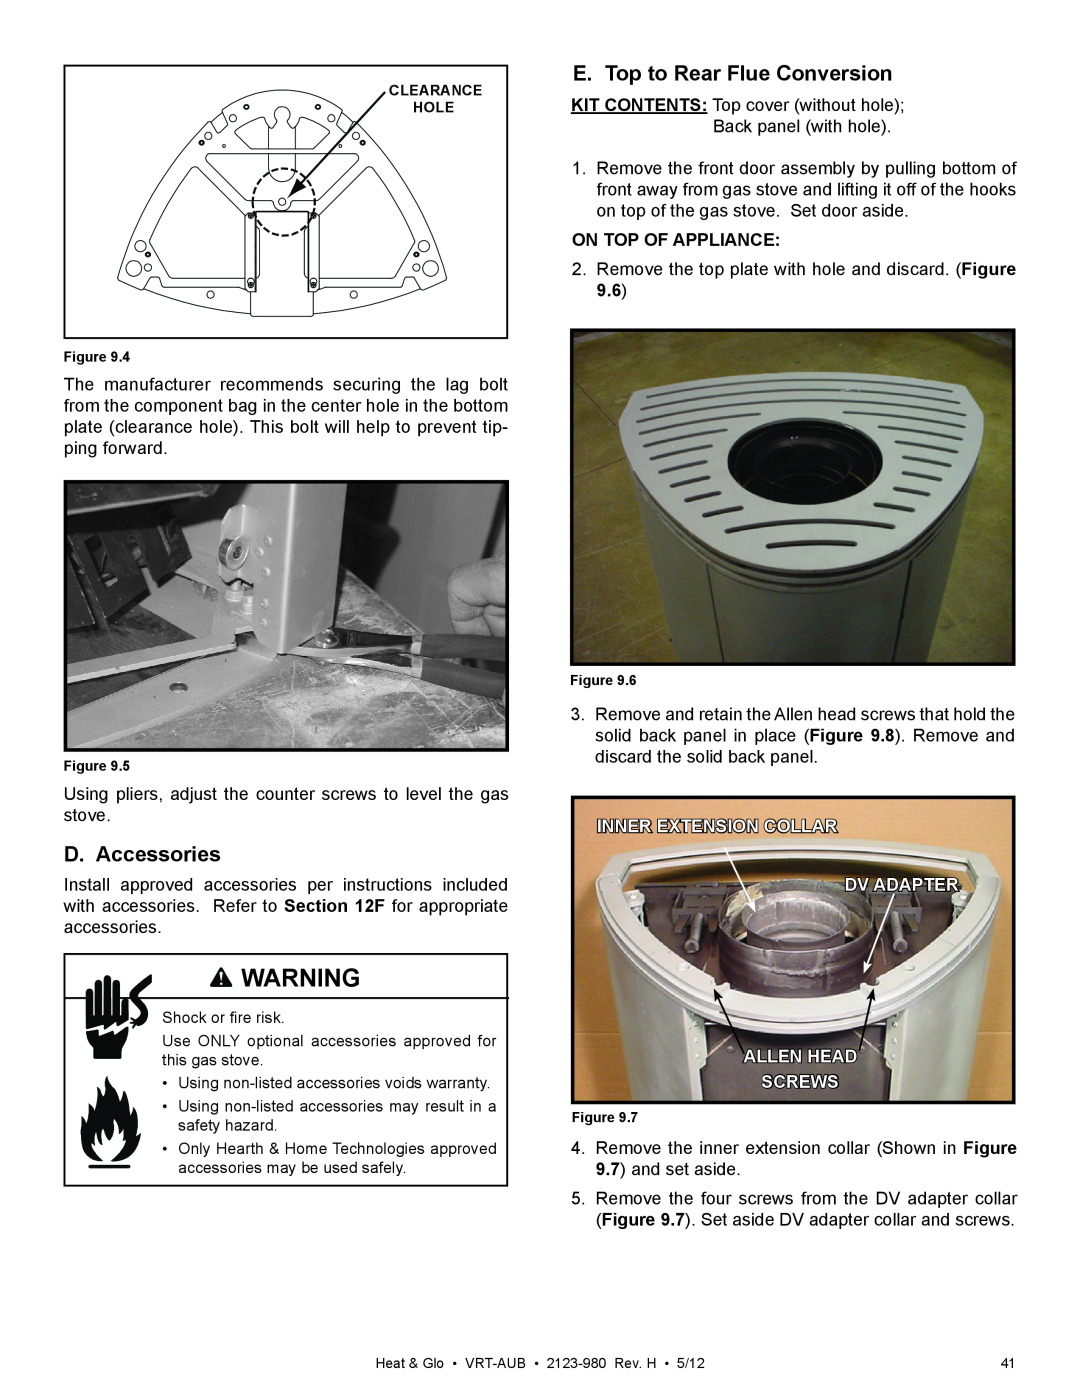 Heat & Glo LifeStyle VRT-GY-P-AUB owner manual D. Accessories, E. Top to Rear Flue Conversion, On Top Of Appliance, Screws 